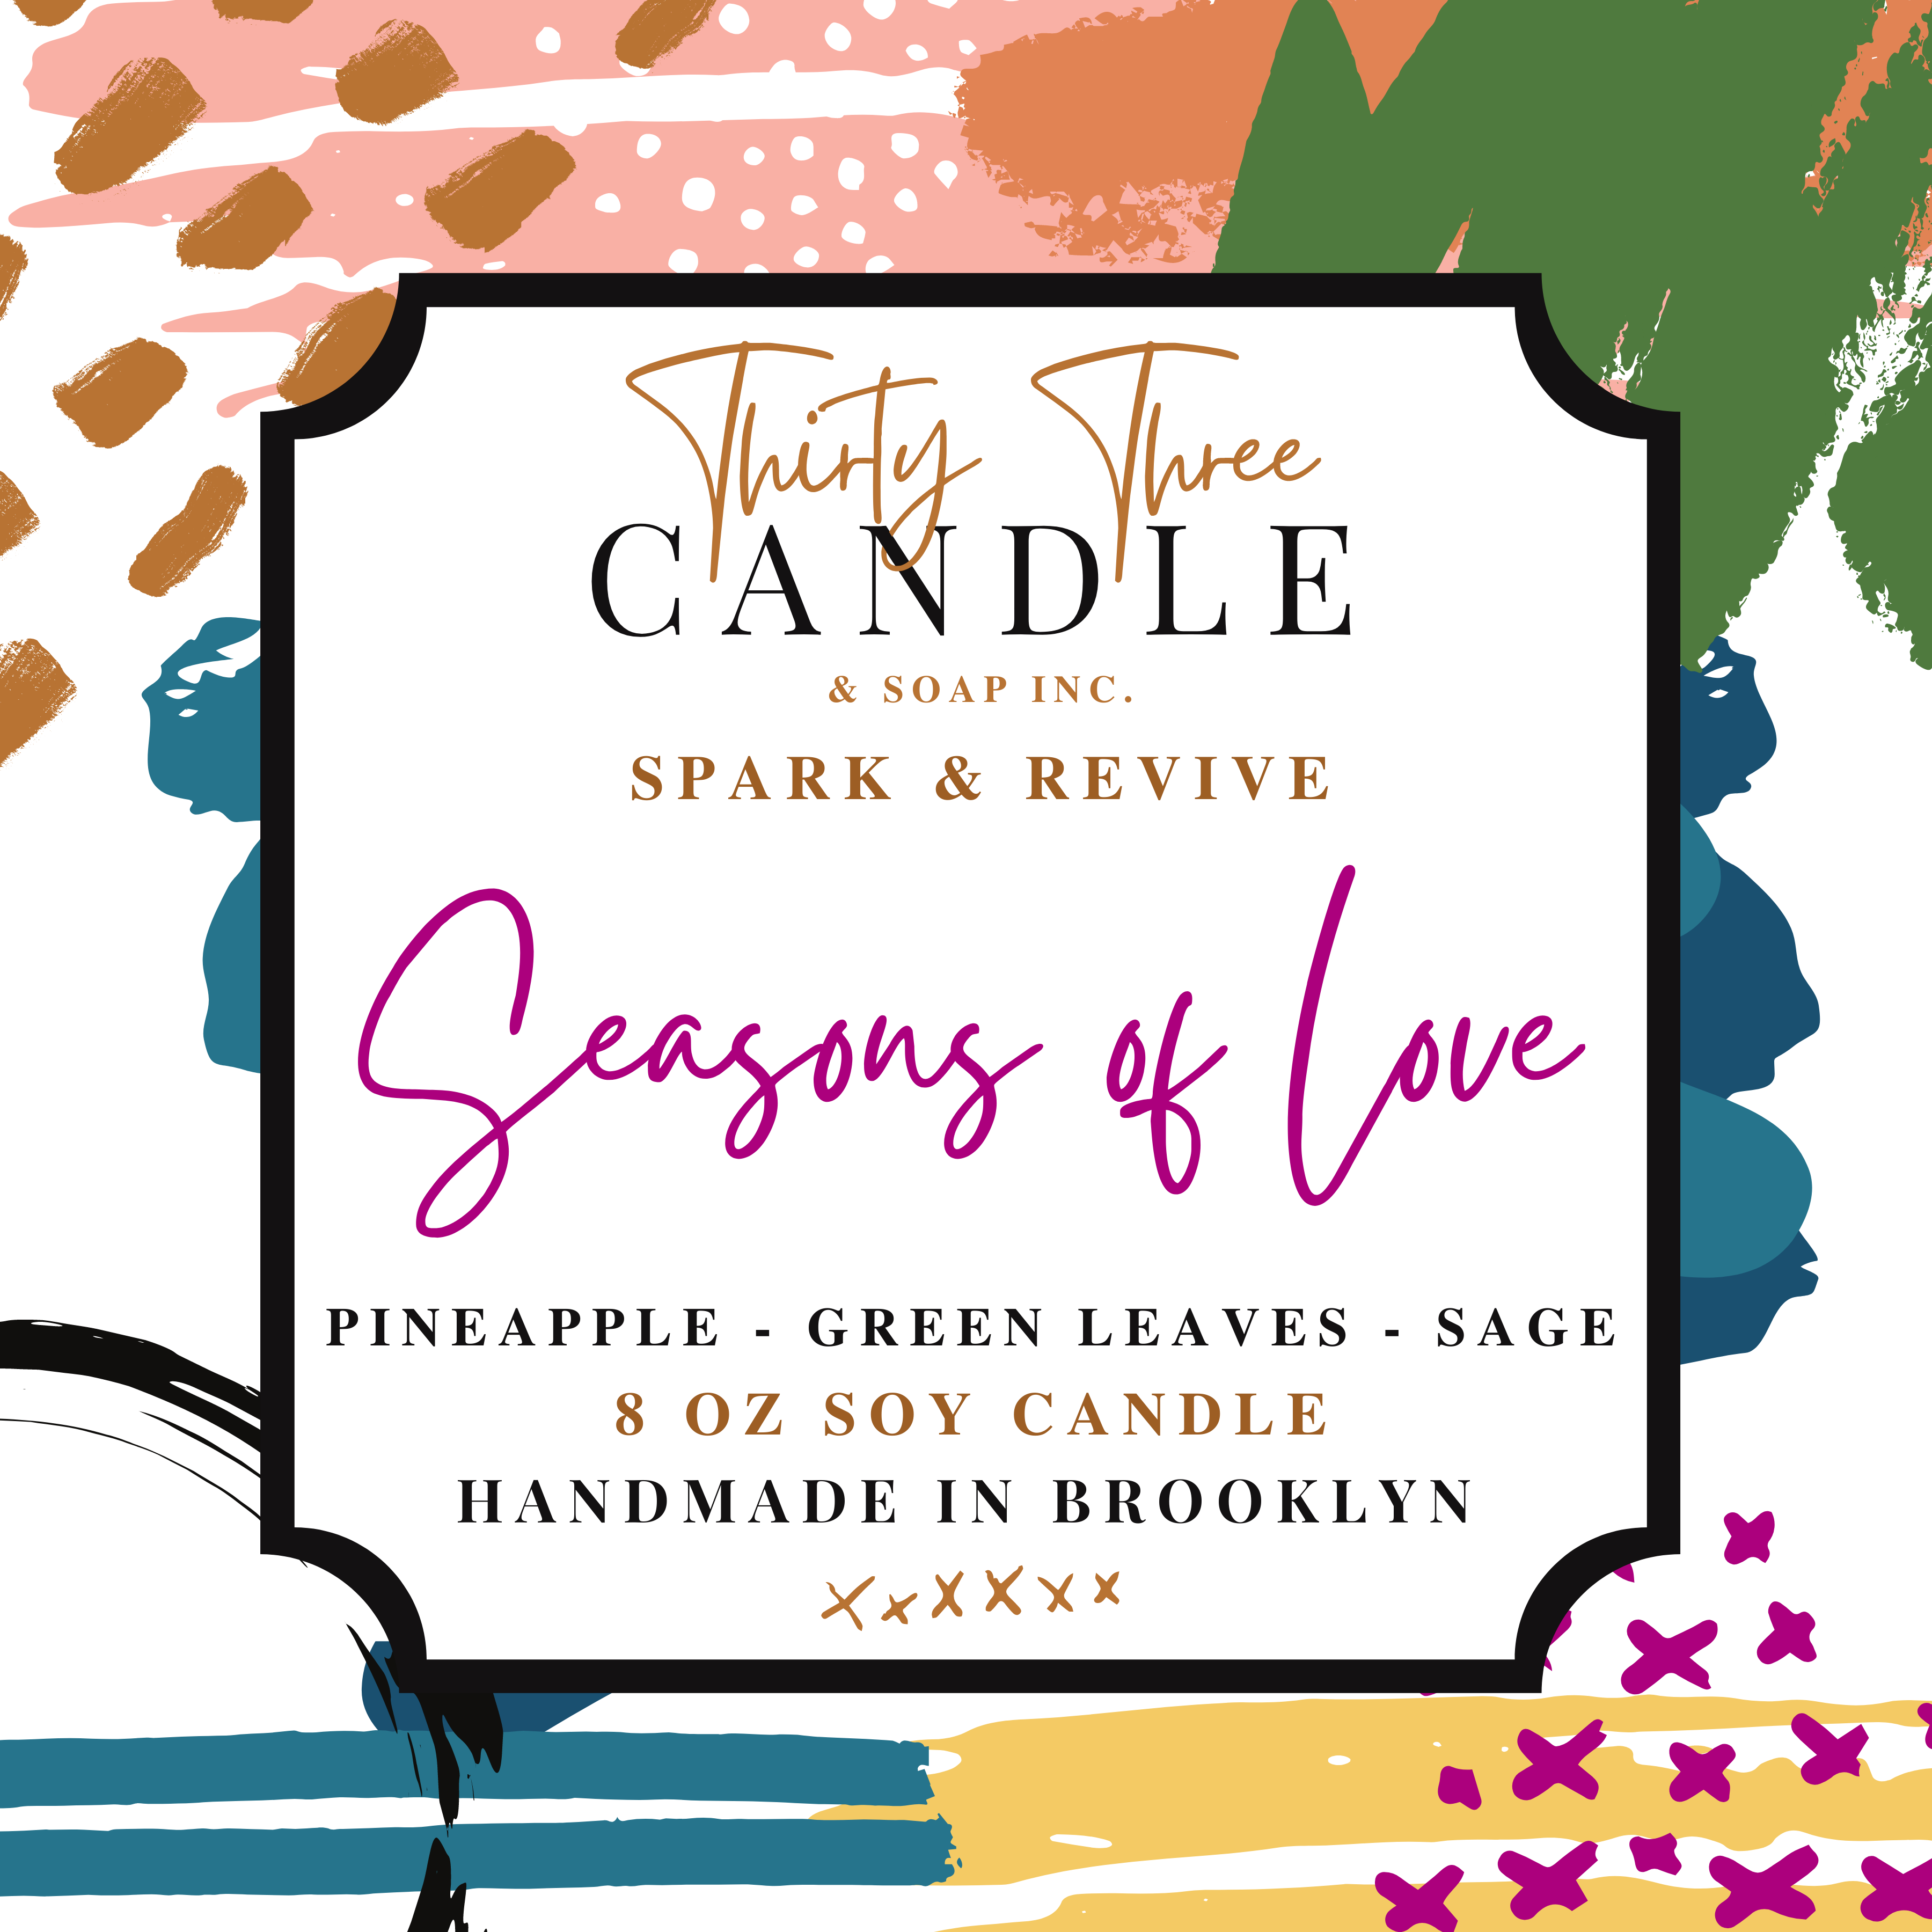 Uplift your mood and awaken your senses with our Seasons of Love scented soy candle. Seasons of Love is a sweet but not overwhelming blend of pineapple, sage, and green leaves. It is sure to put you in good spirits and bring love to your day. Seasons of Love is infused with natural essential oils, including eucalyptus, cedar, vetiver, palmarosa, clary sage, lemongrass, amyris, black pepper, cade, and blue chamomile flower. @SparkandRevive